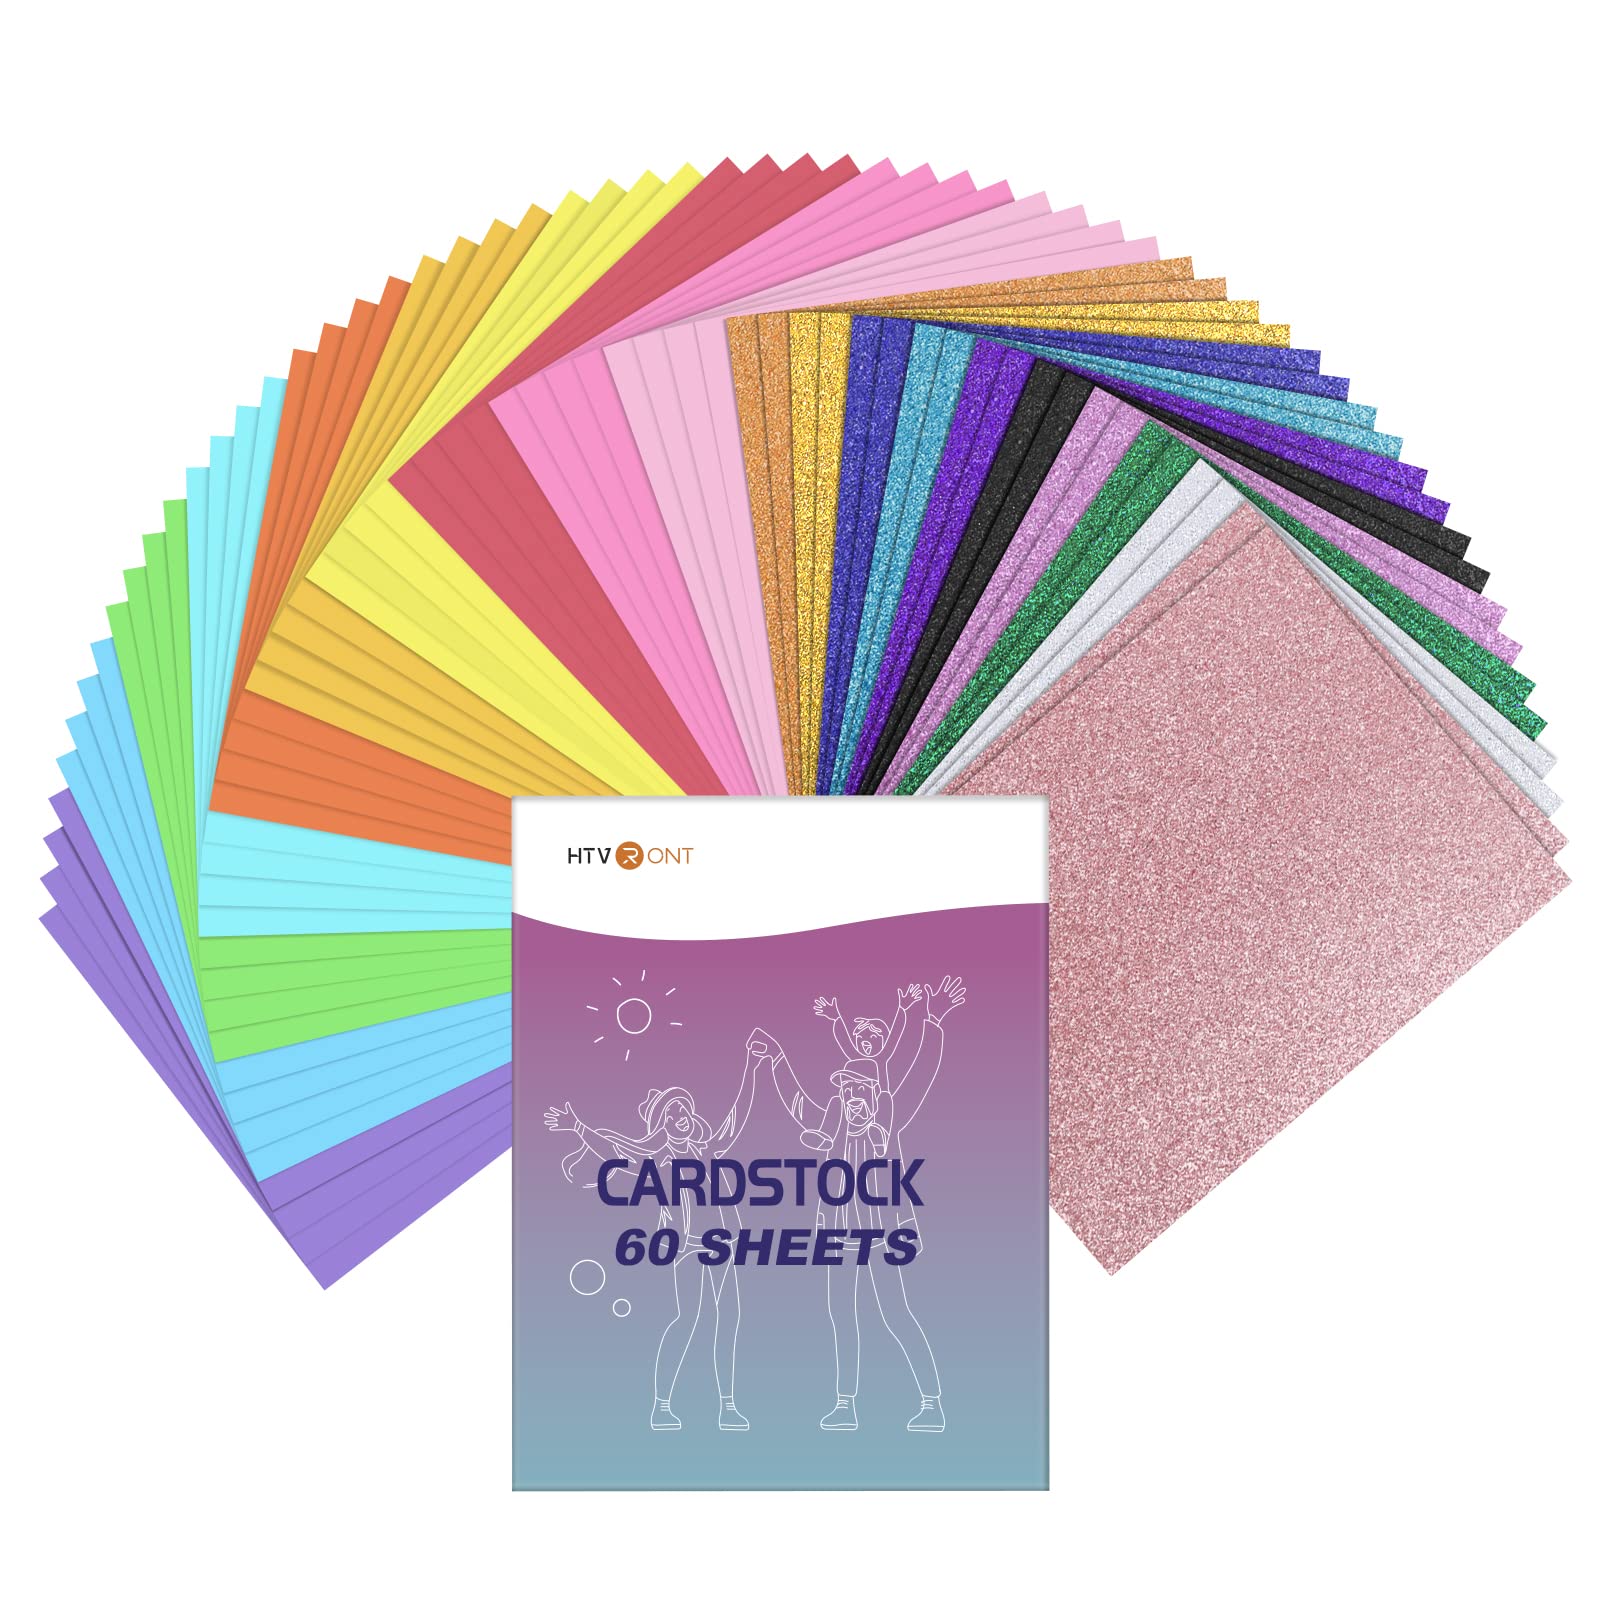 Glitter Cardstock, Double Sided Glitter Cardstock Paper for Crafts, 20  Sheets 10 Colors Glitter Paper for DIY & Art Projects, Sparkly Card Stock  Paper